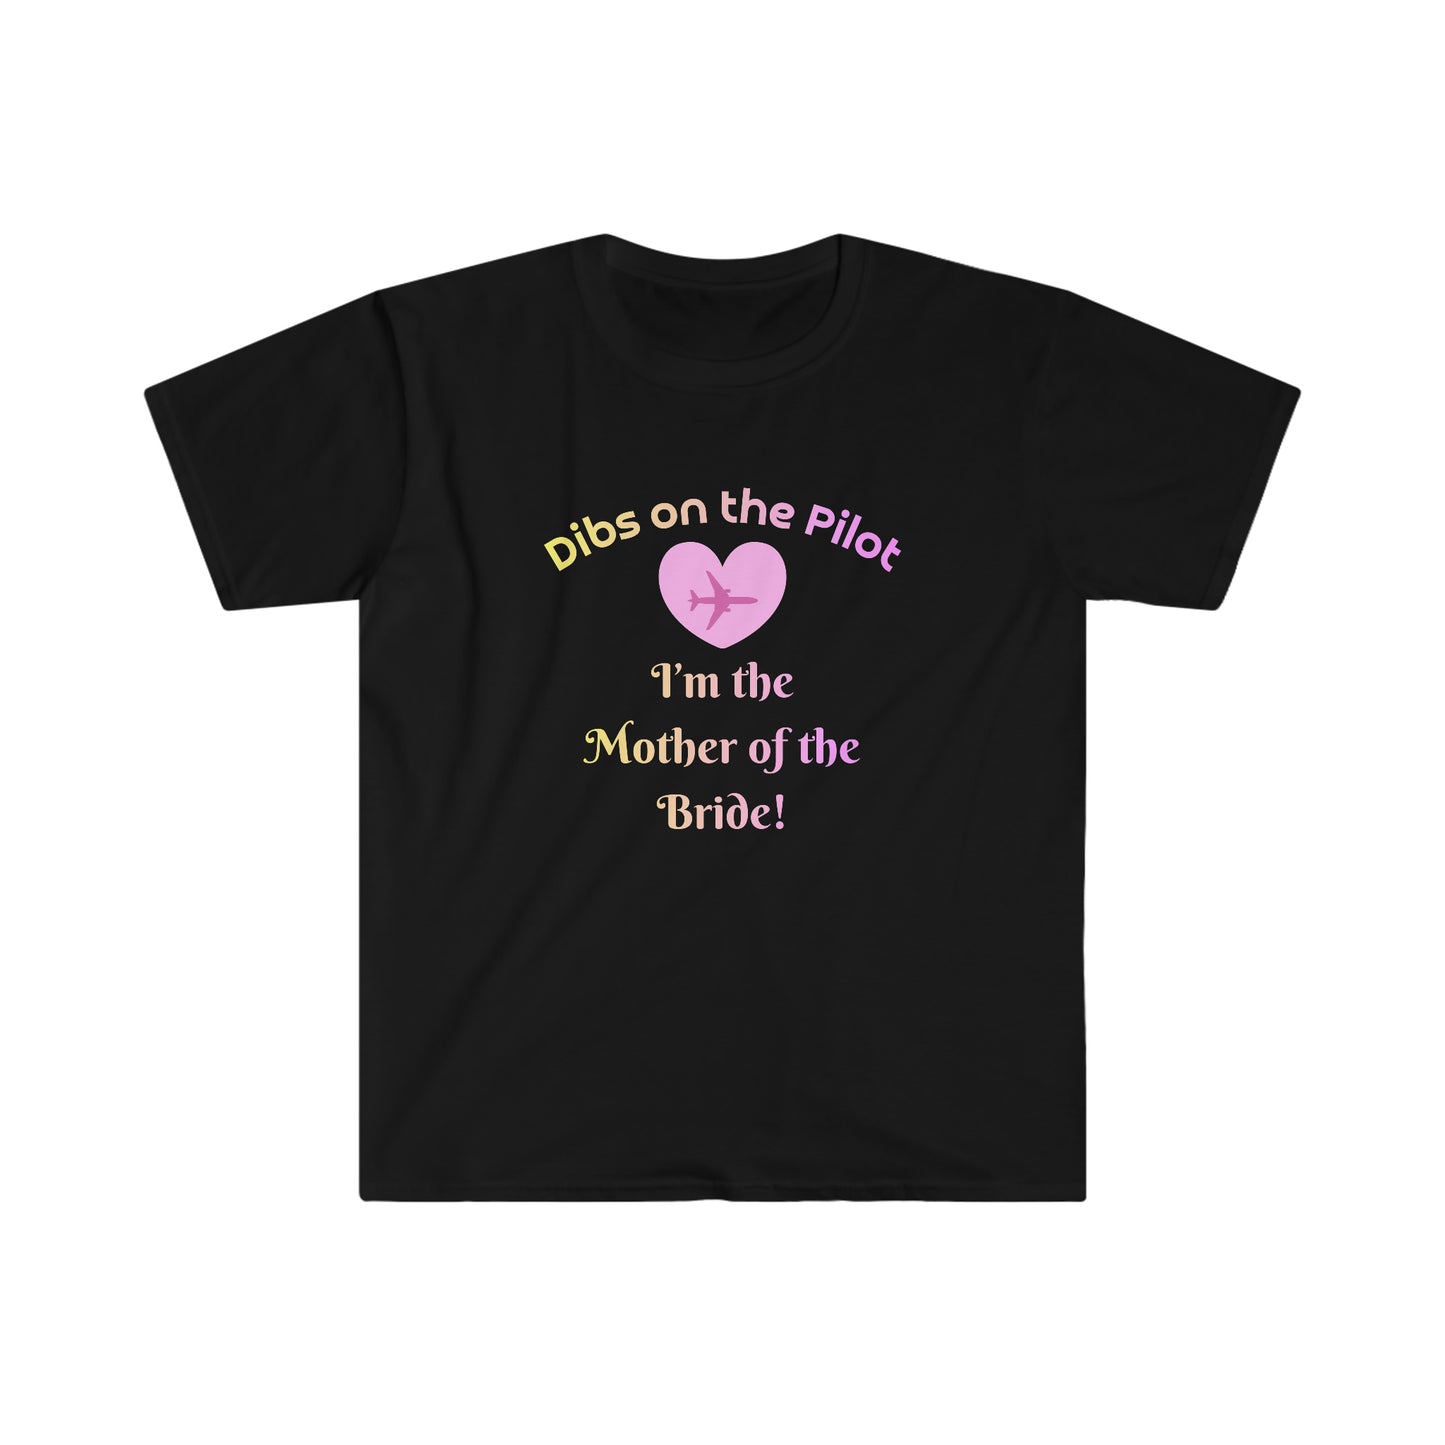 Mother of the Bride "Dibs on the Pilot" Bachelorette Party T-Shirt